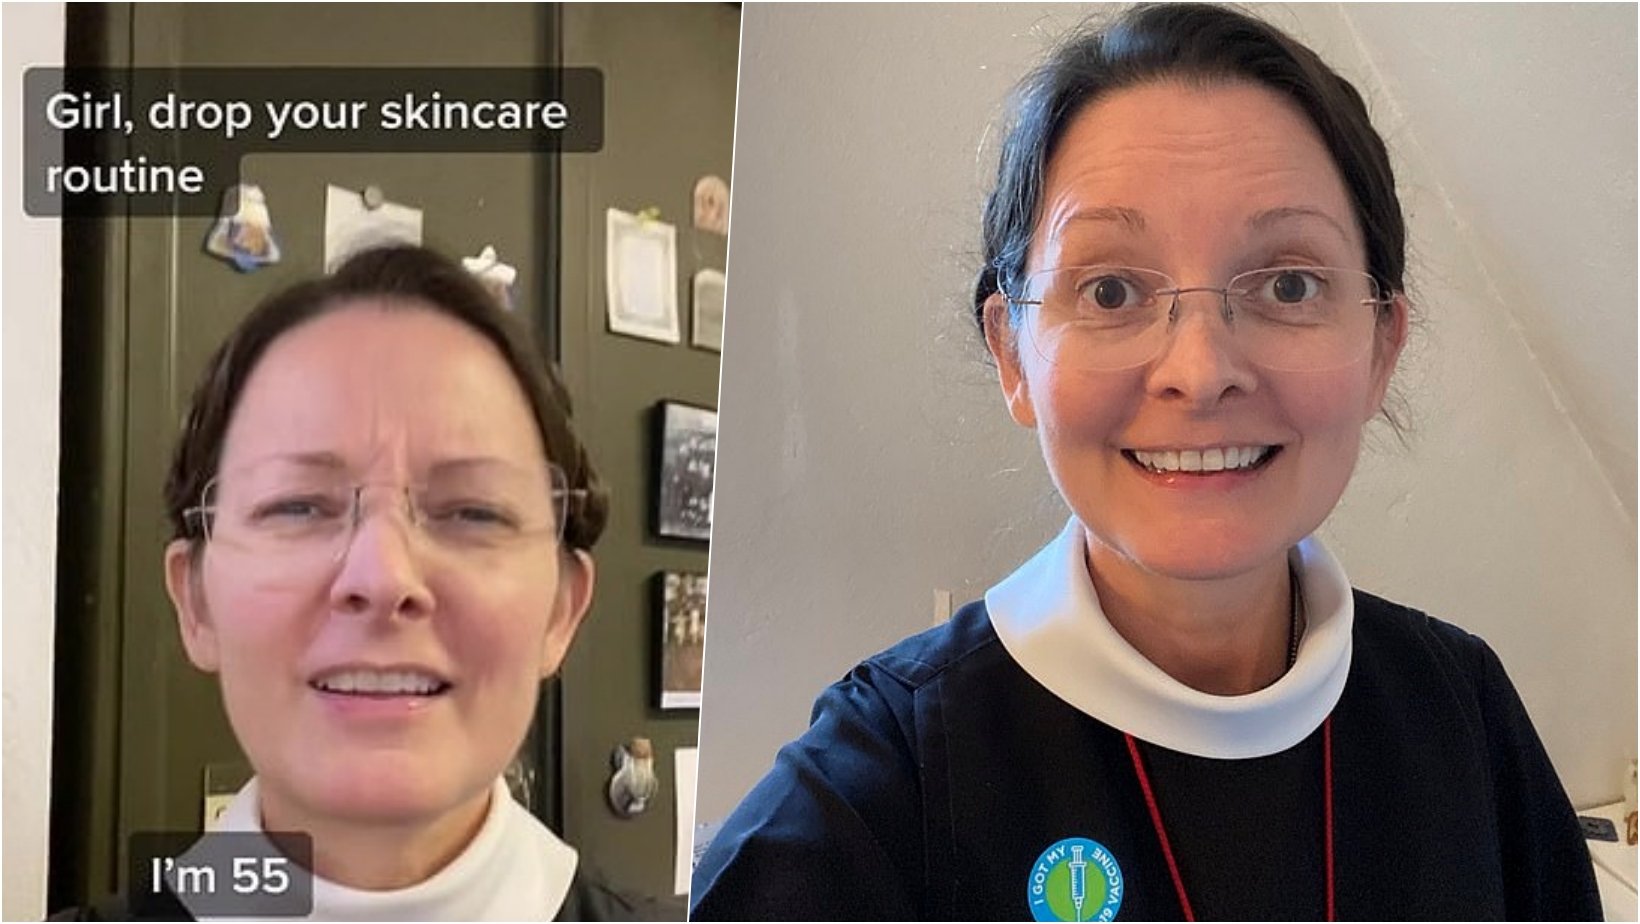 6 facebook cover 5.jpg?resize=1200,630 - 55-Year-Old Nun Goes Viral After Sharing Her VERY SIMPLE Skincare Routine